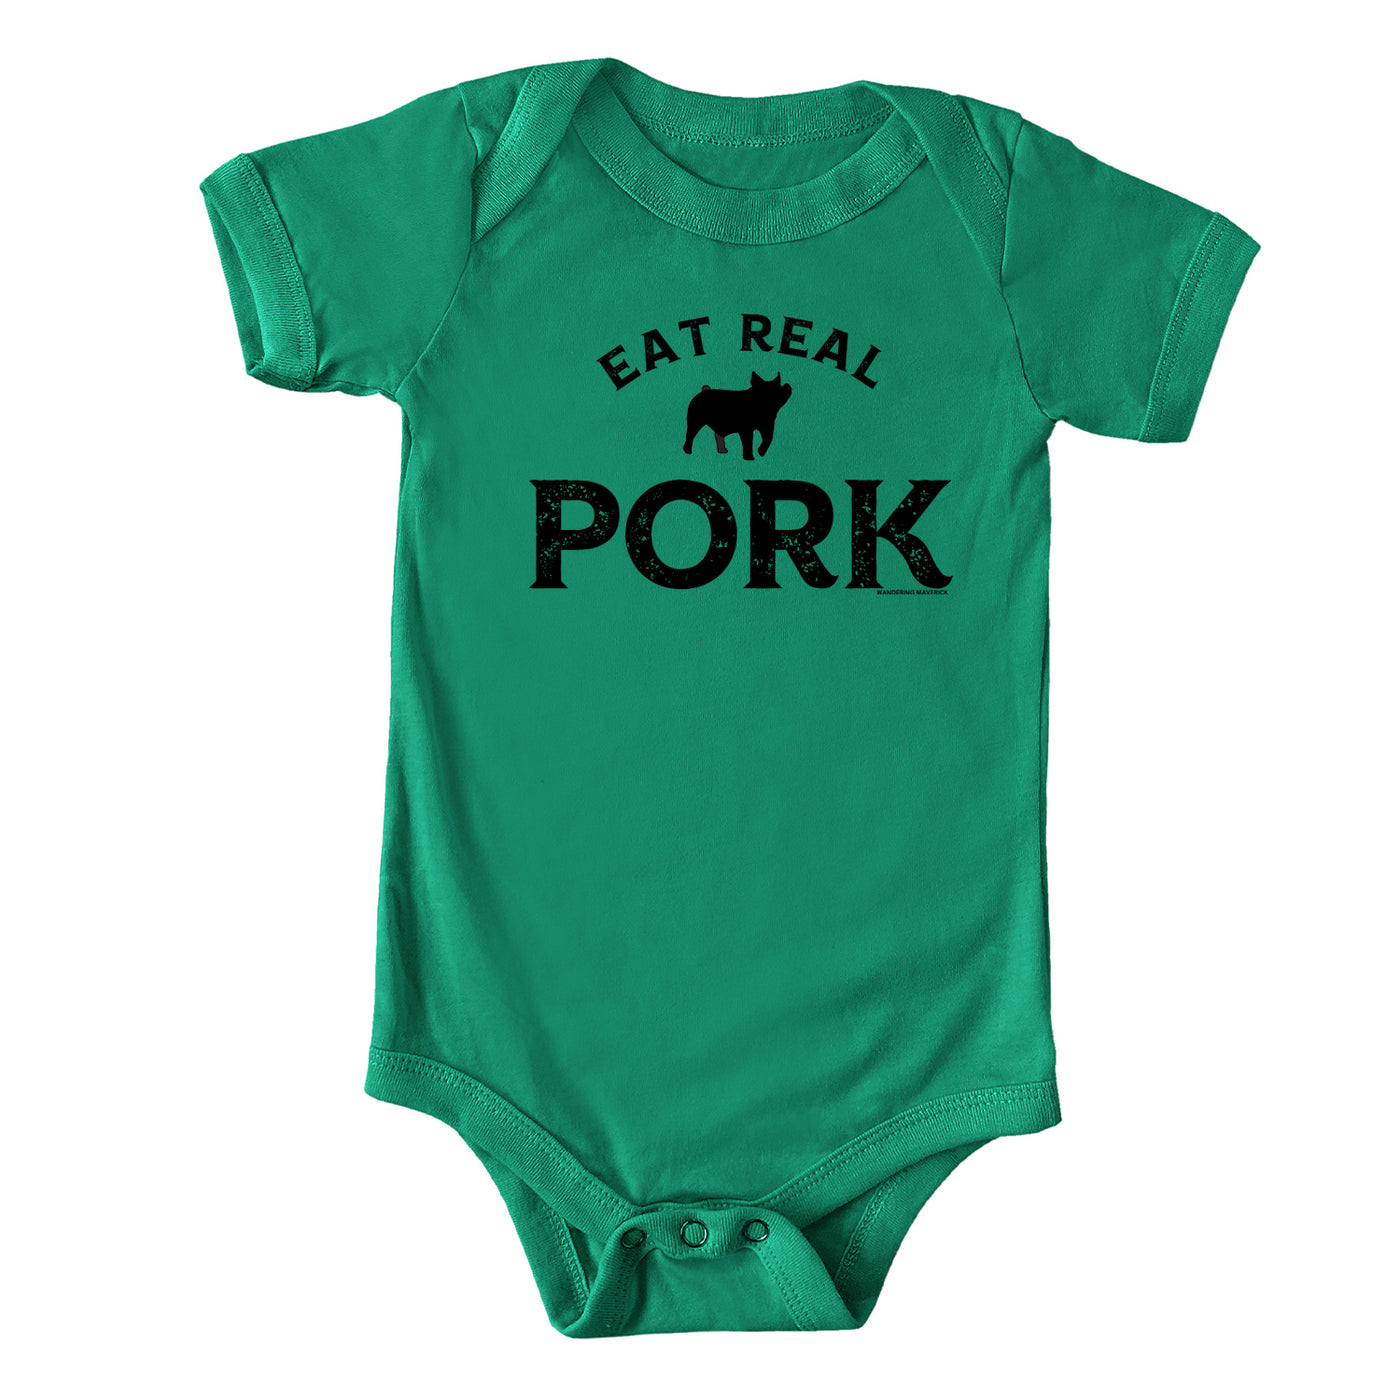 Eat Real Pork One Piece/T-Shirt (Newborn - Youth XL) - Multiple Colors!